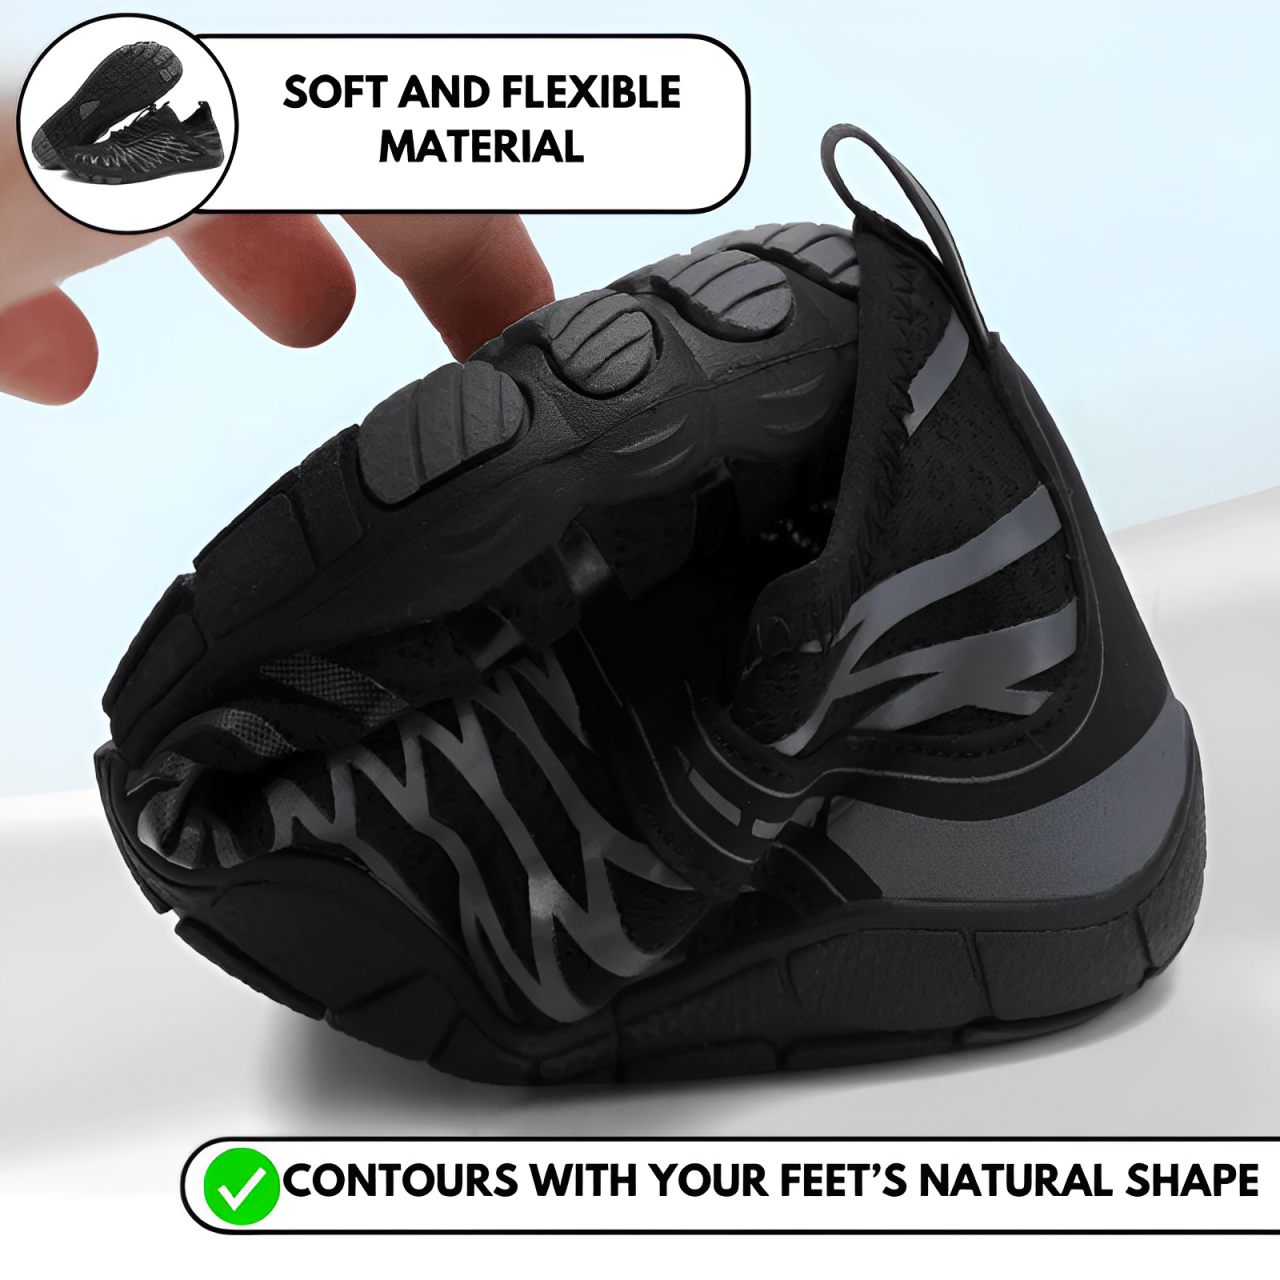 GRW Ortho Barefoot (Men) - Healthy, Comfortable, Non-slip & Supportive Shoes | Natural Walk, Super Lightweight